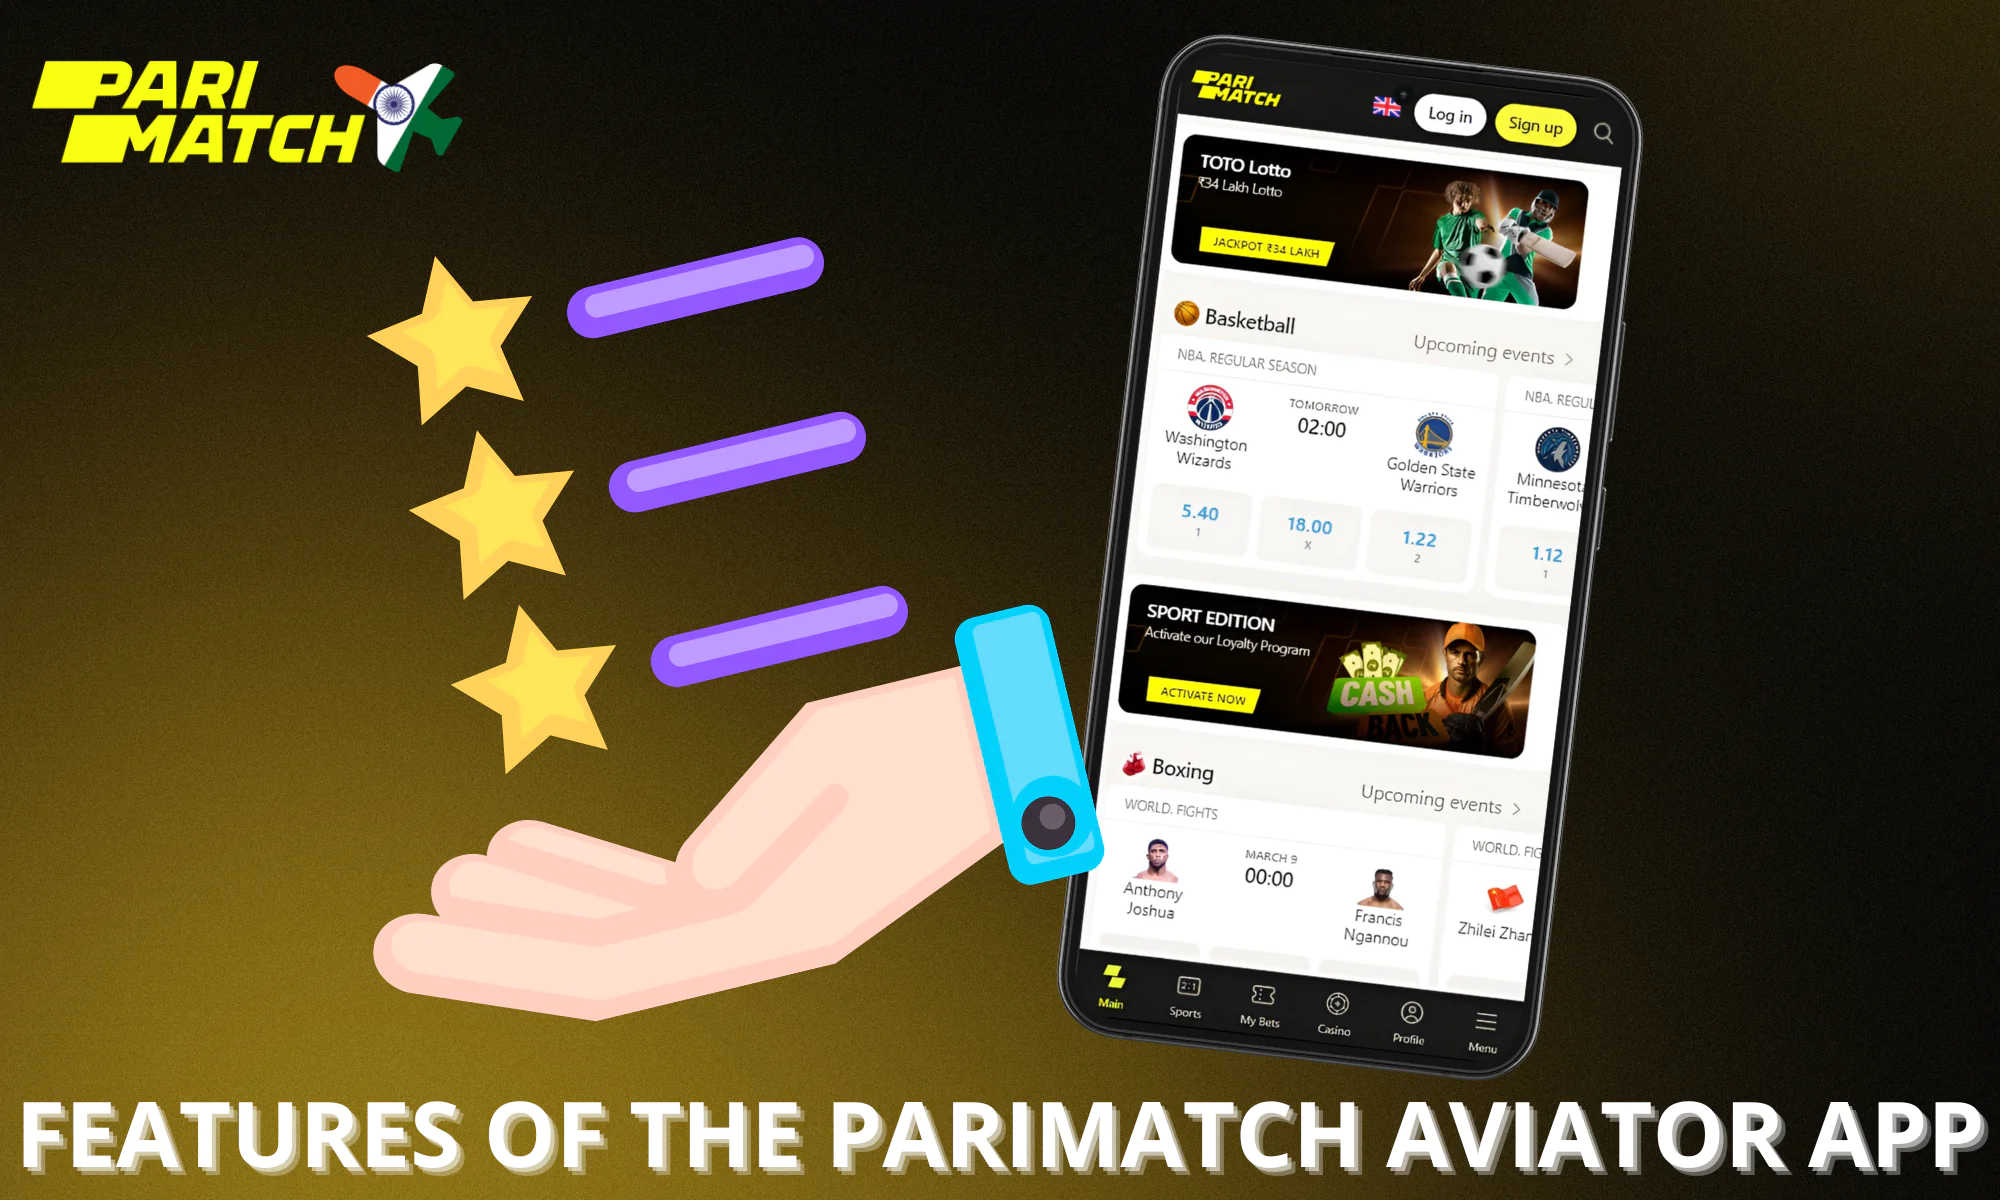 Overview of the main features of the Parimatch Aviator app